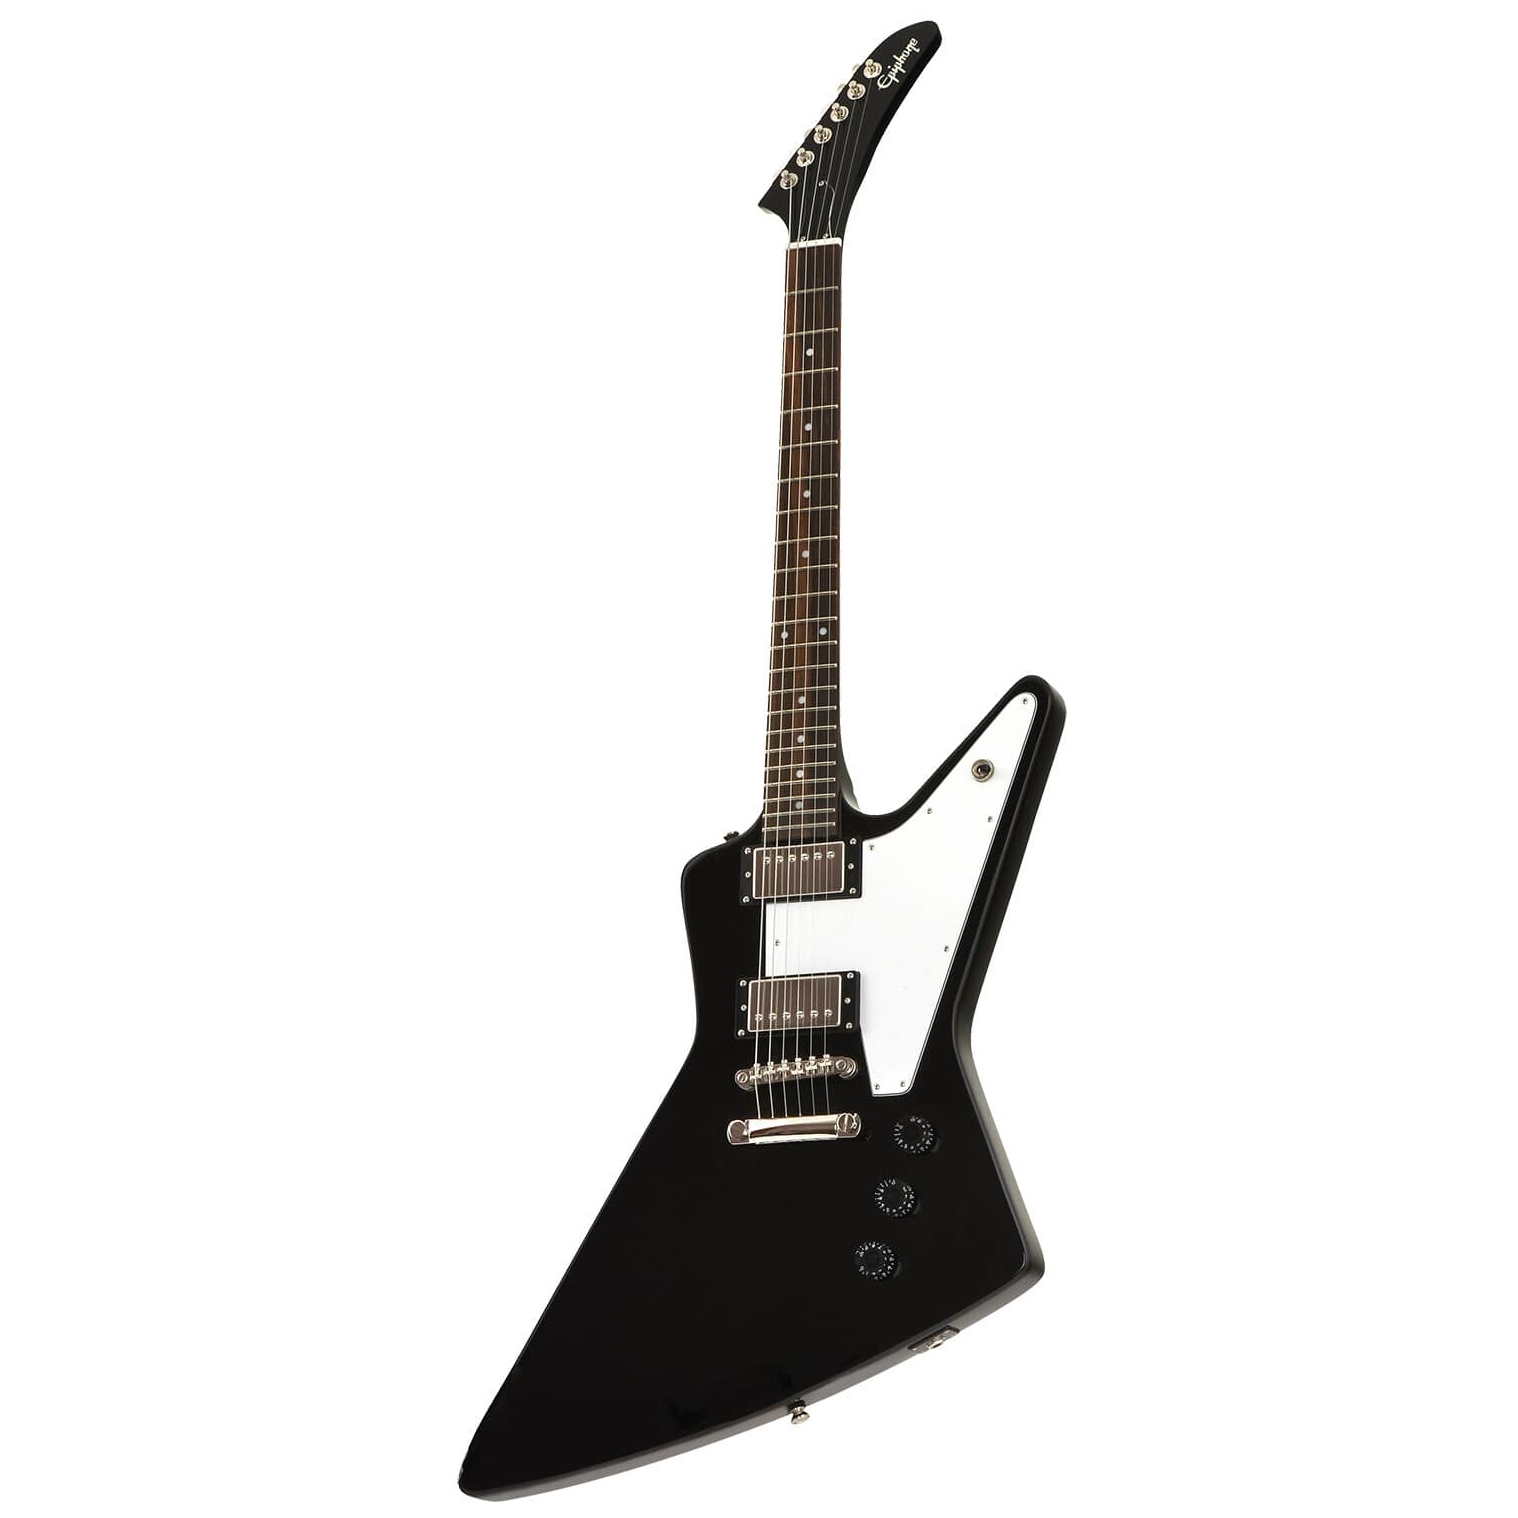 Epiphone Inspired by Gibson Explorer EB